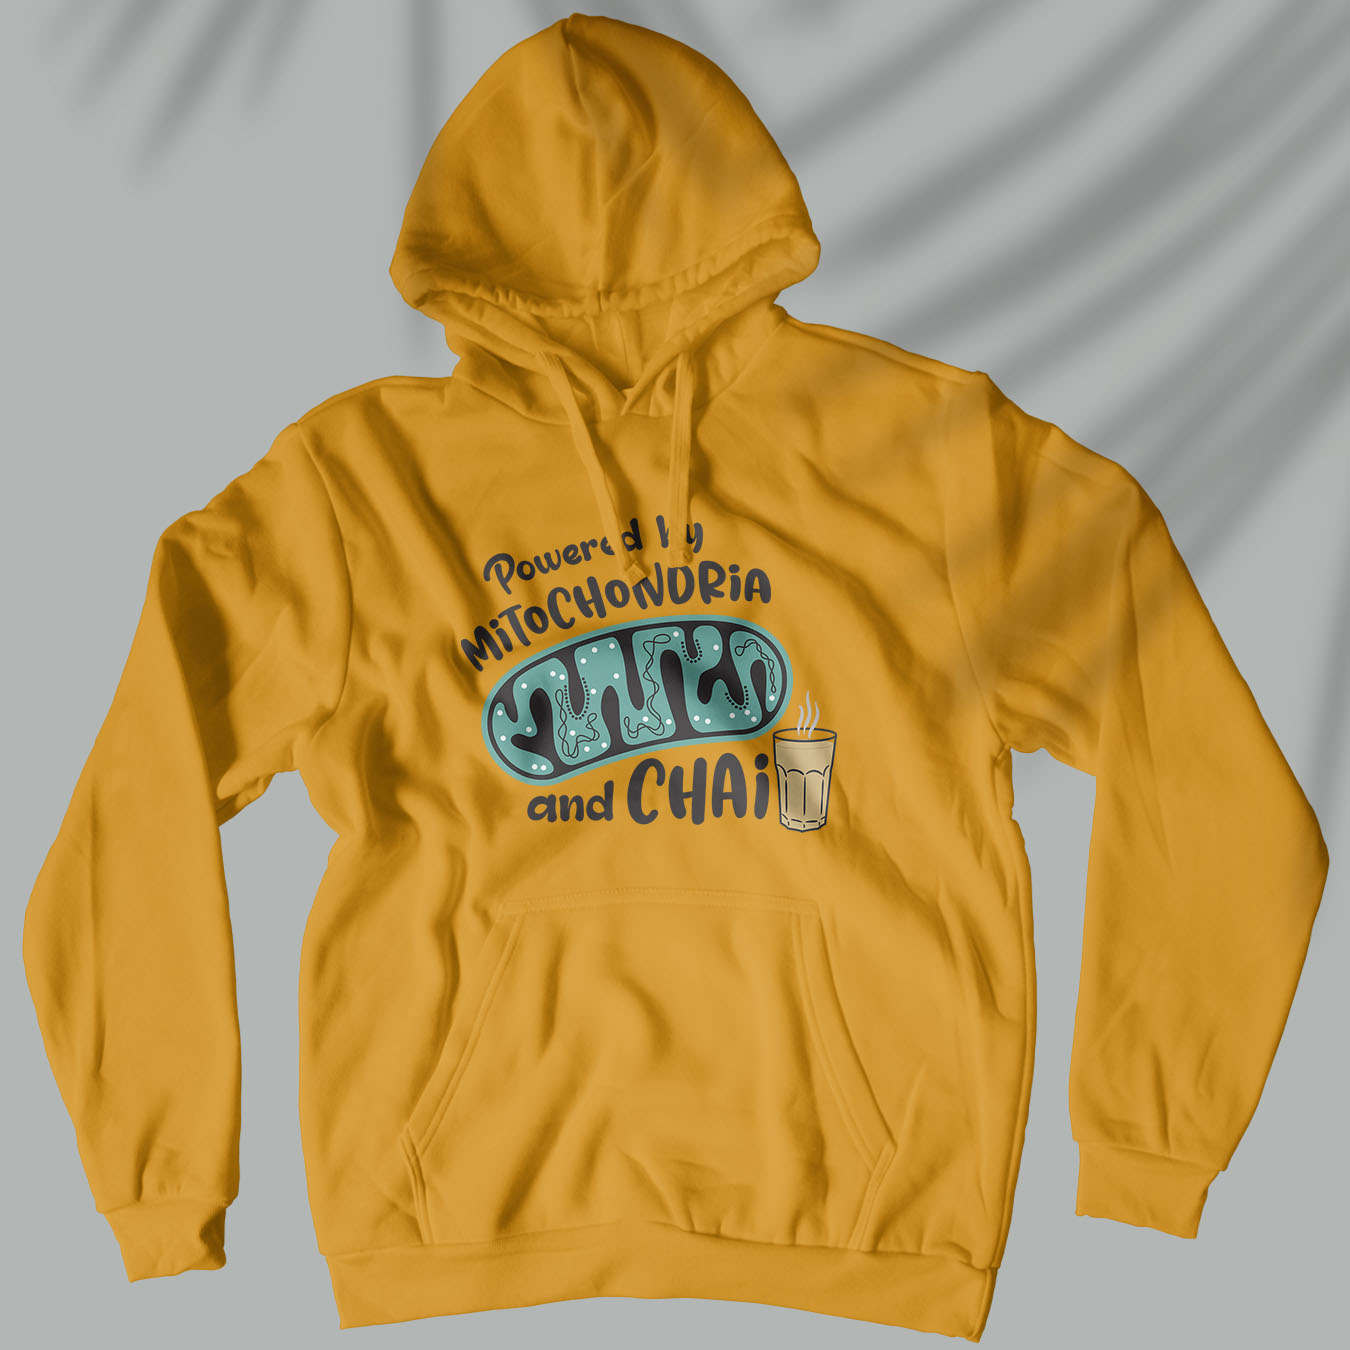 Powered By Mitochondria And Chai - Unisex Hoodie